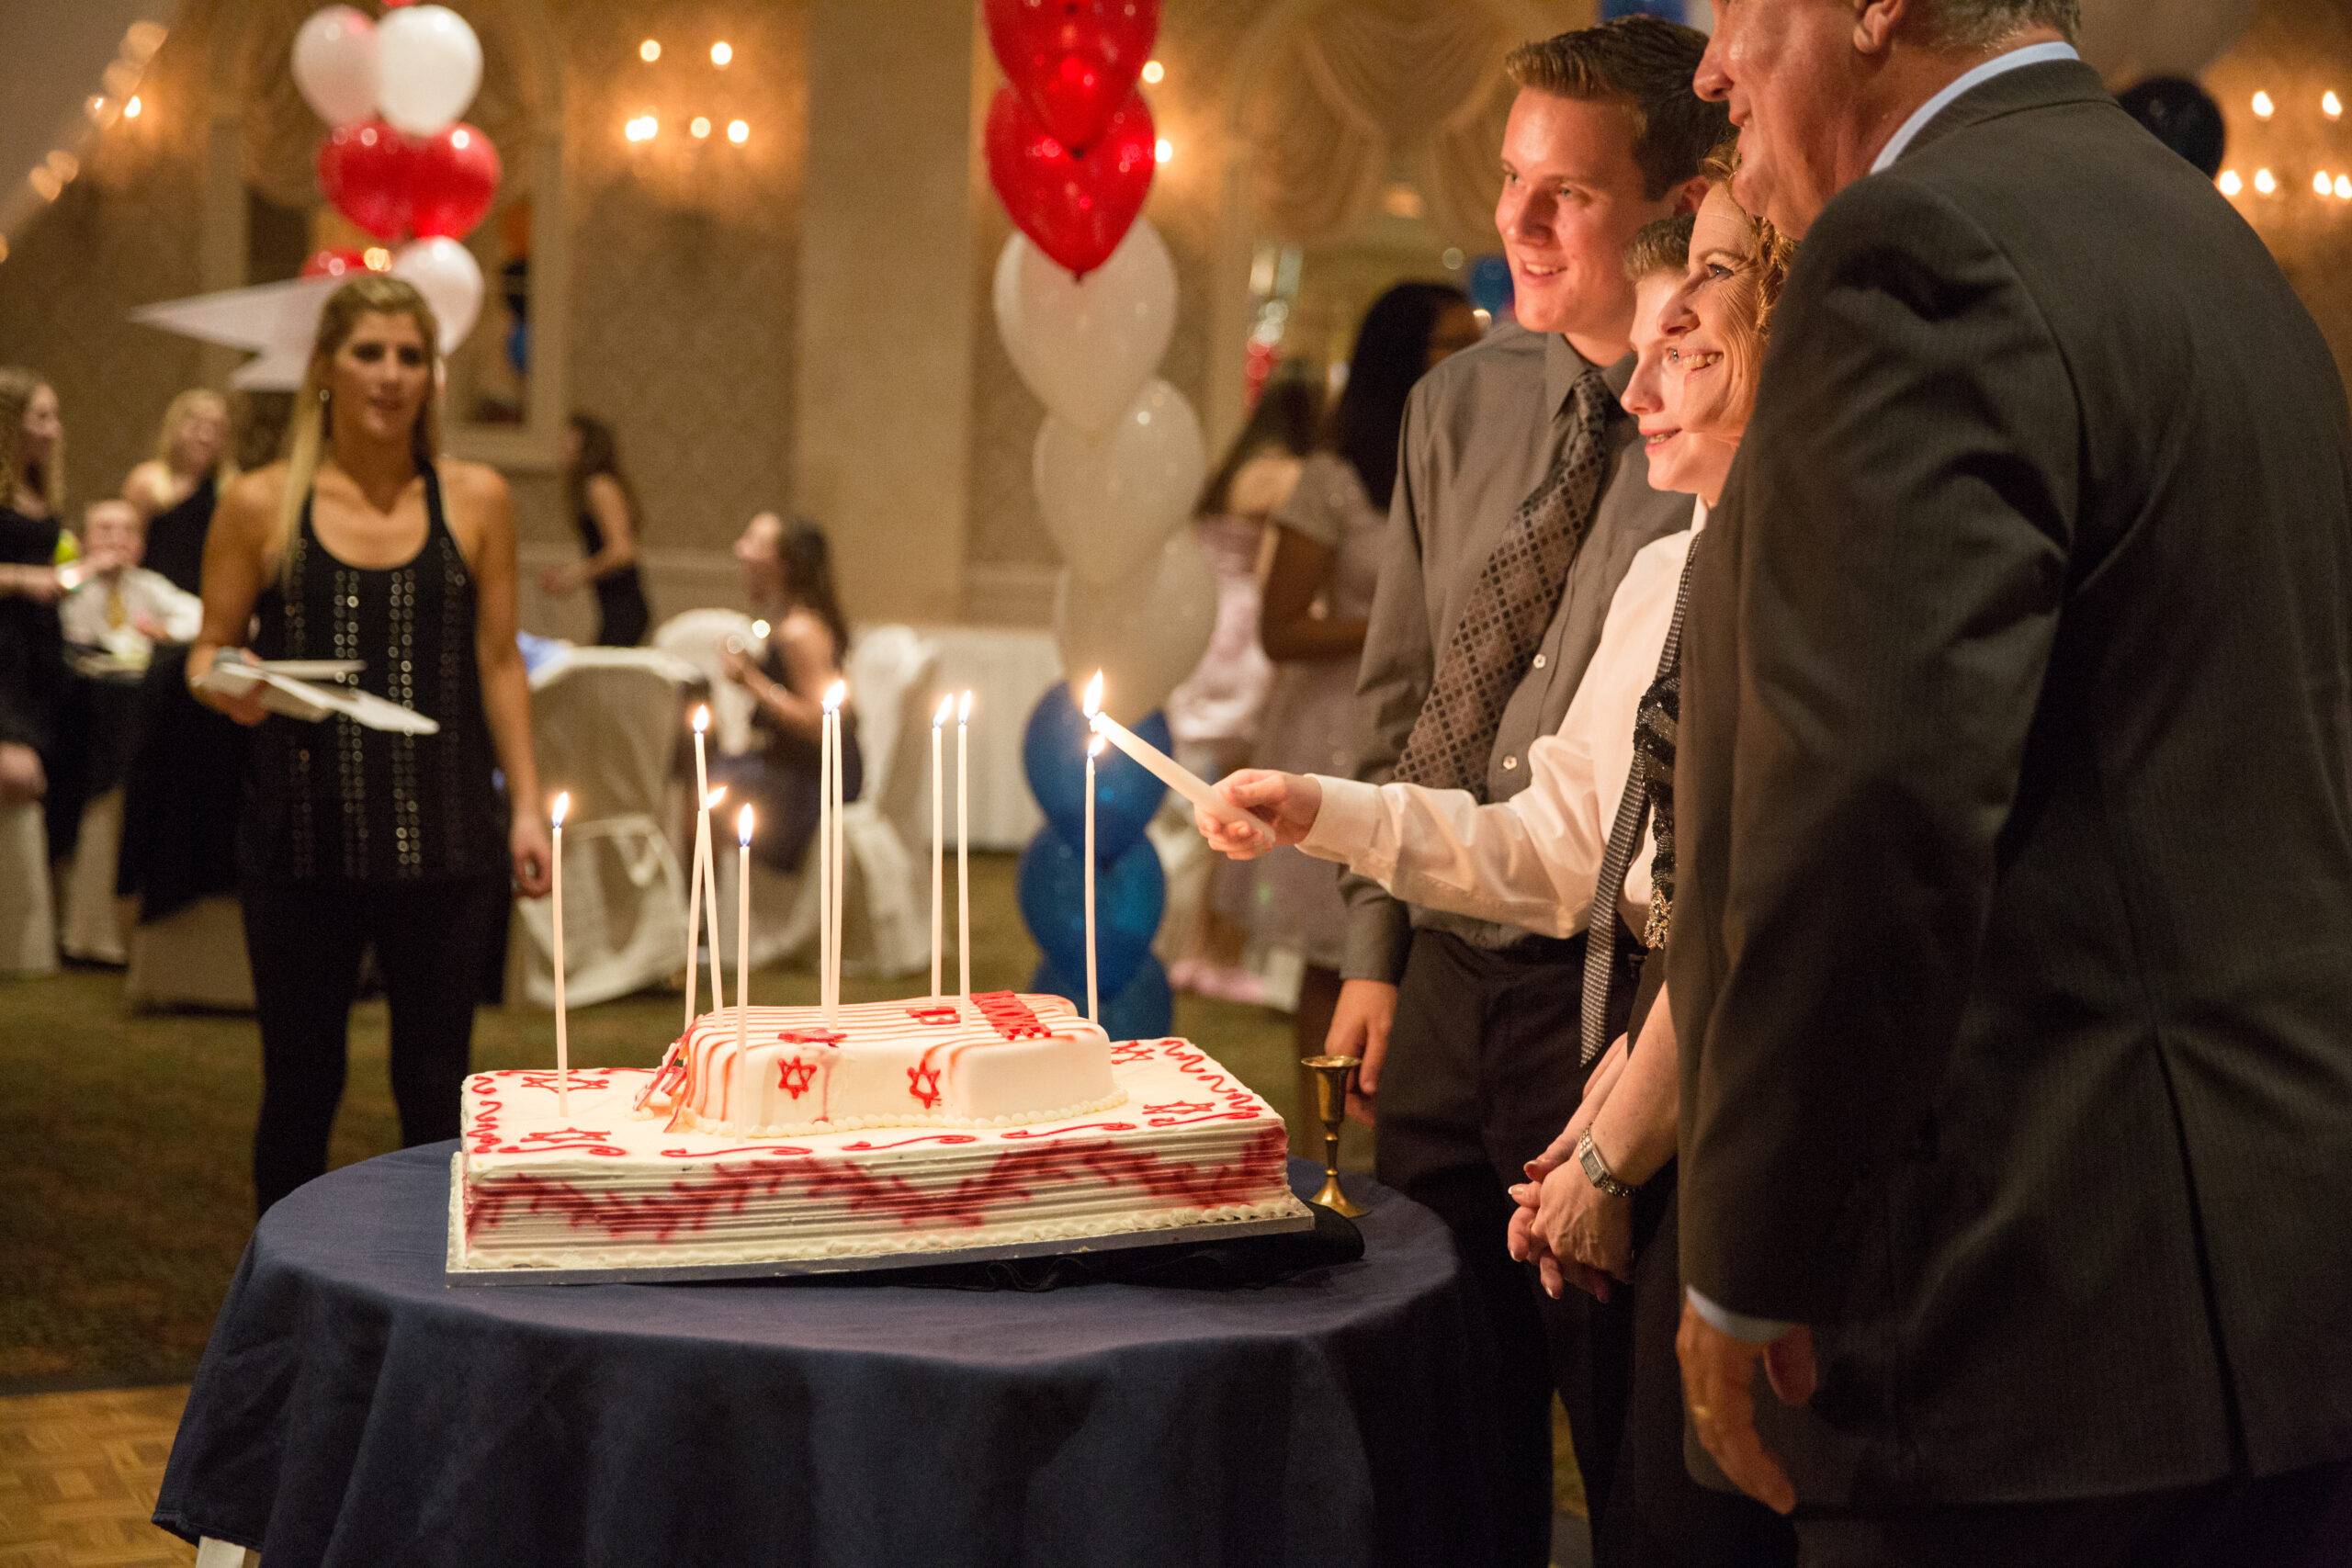 Bar Mitzvah boy lights candles on his cake with his family